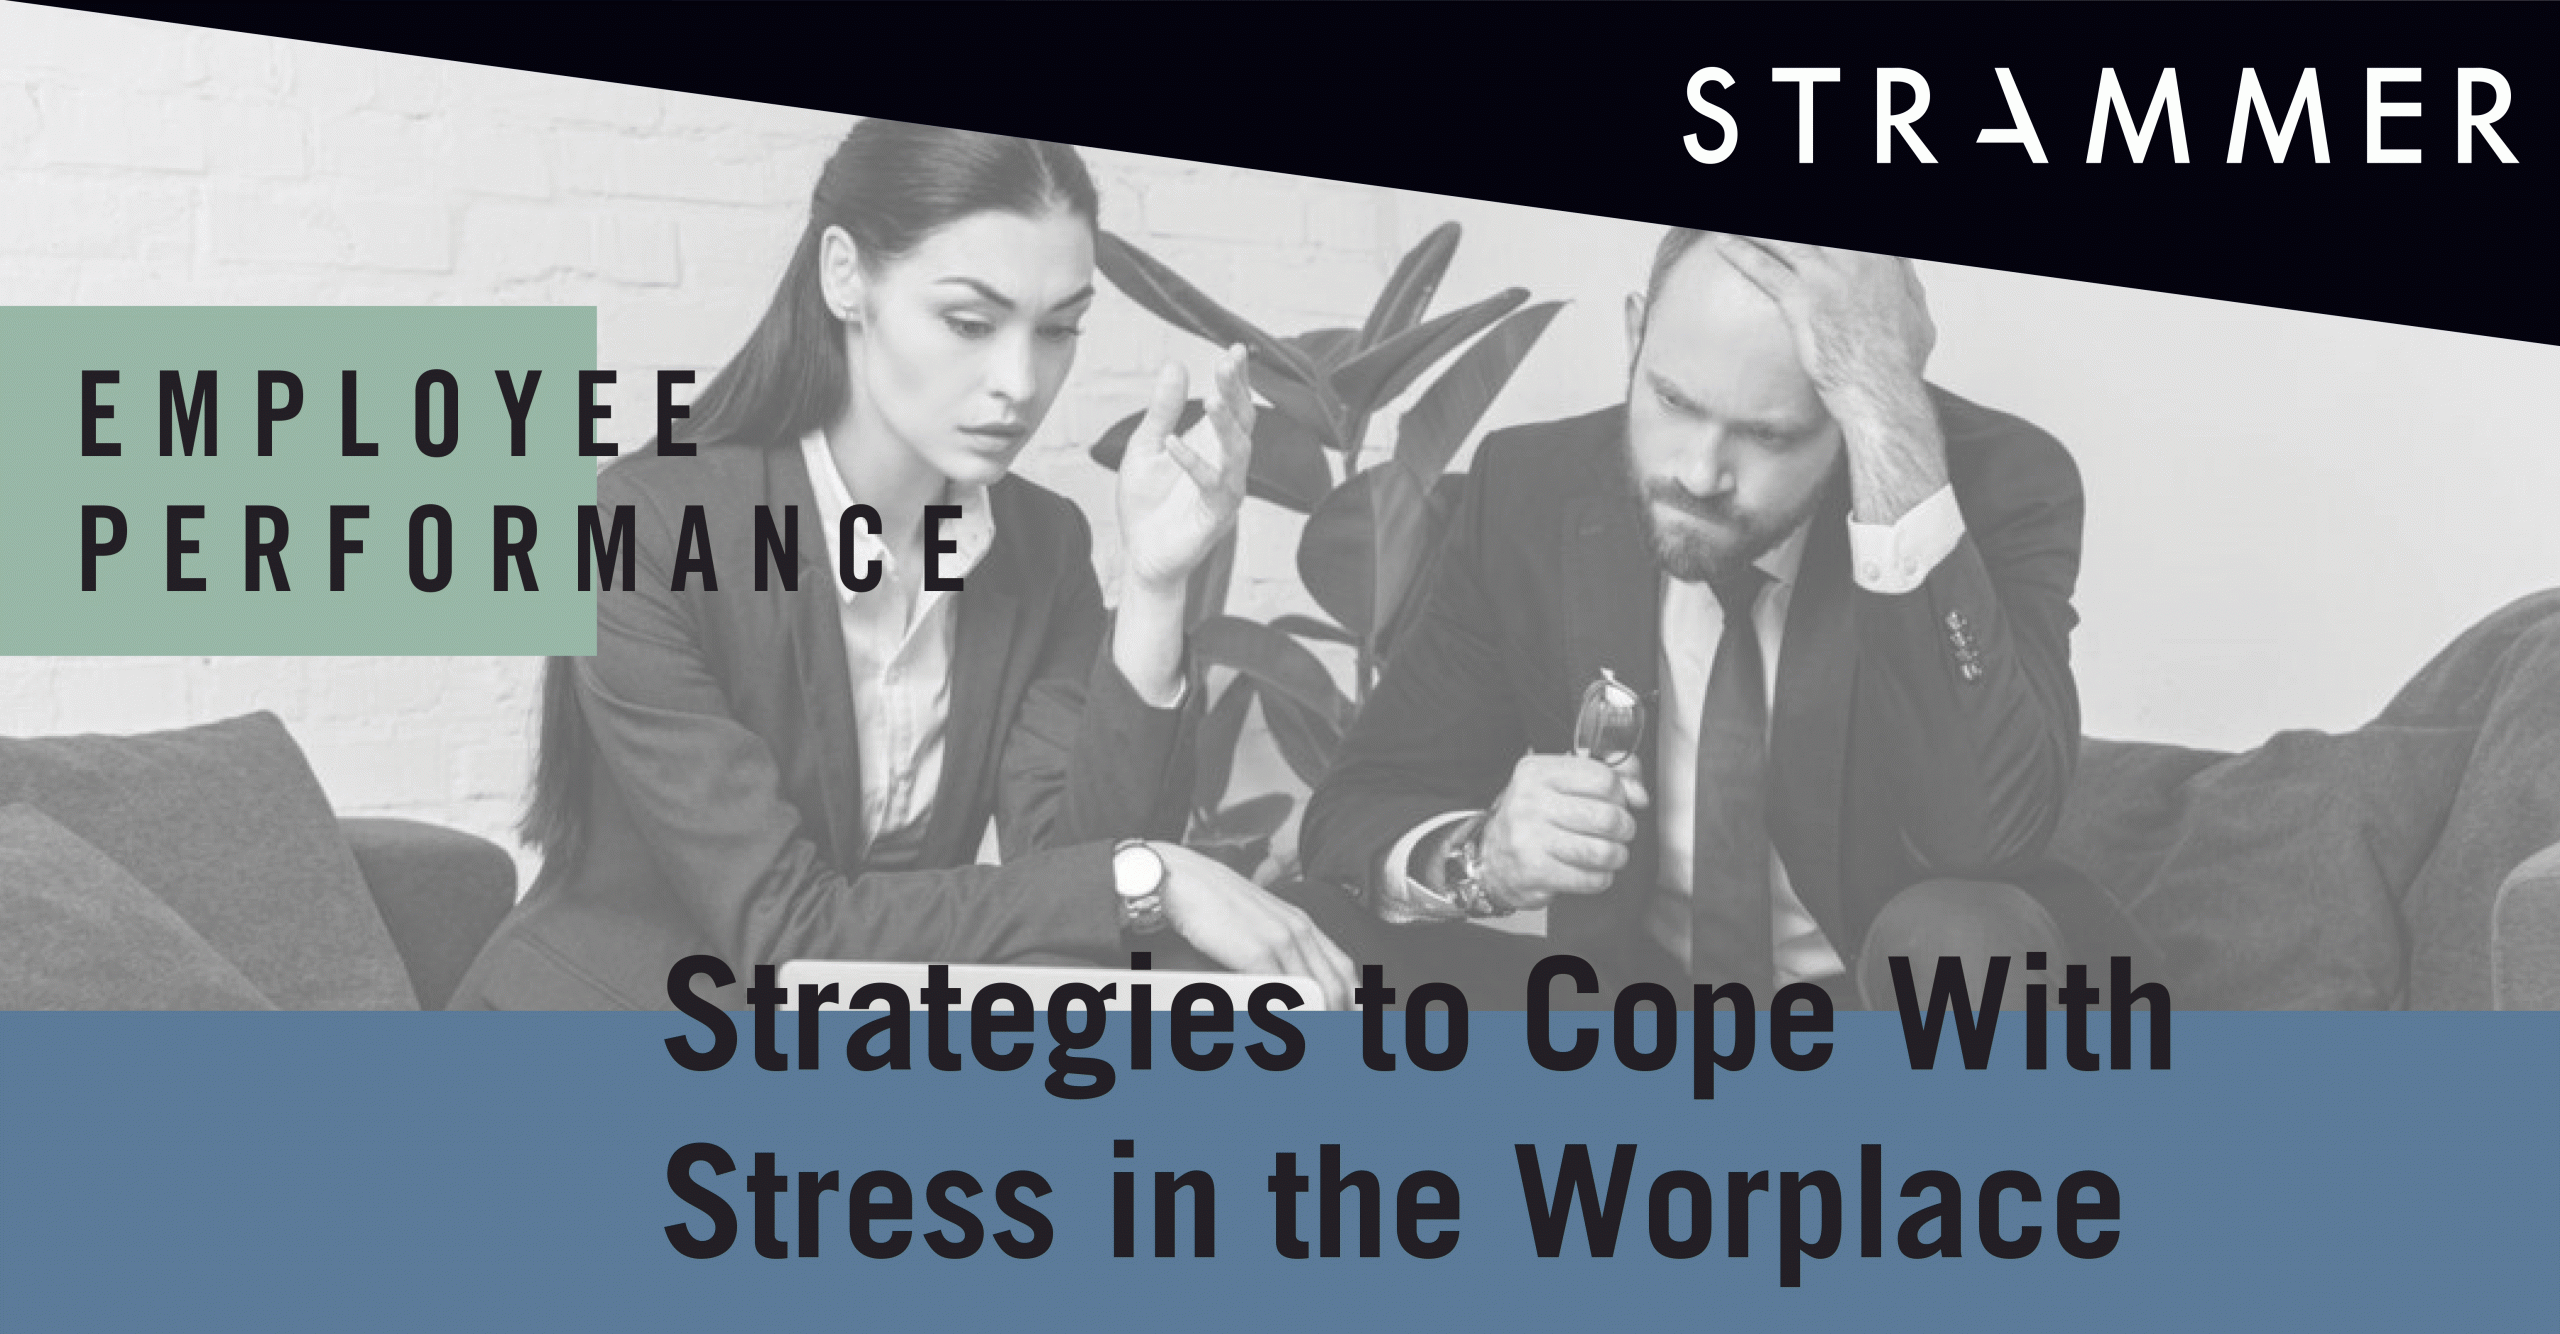 Stress at Work: How Can Employees Deal With It?